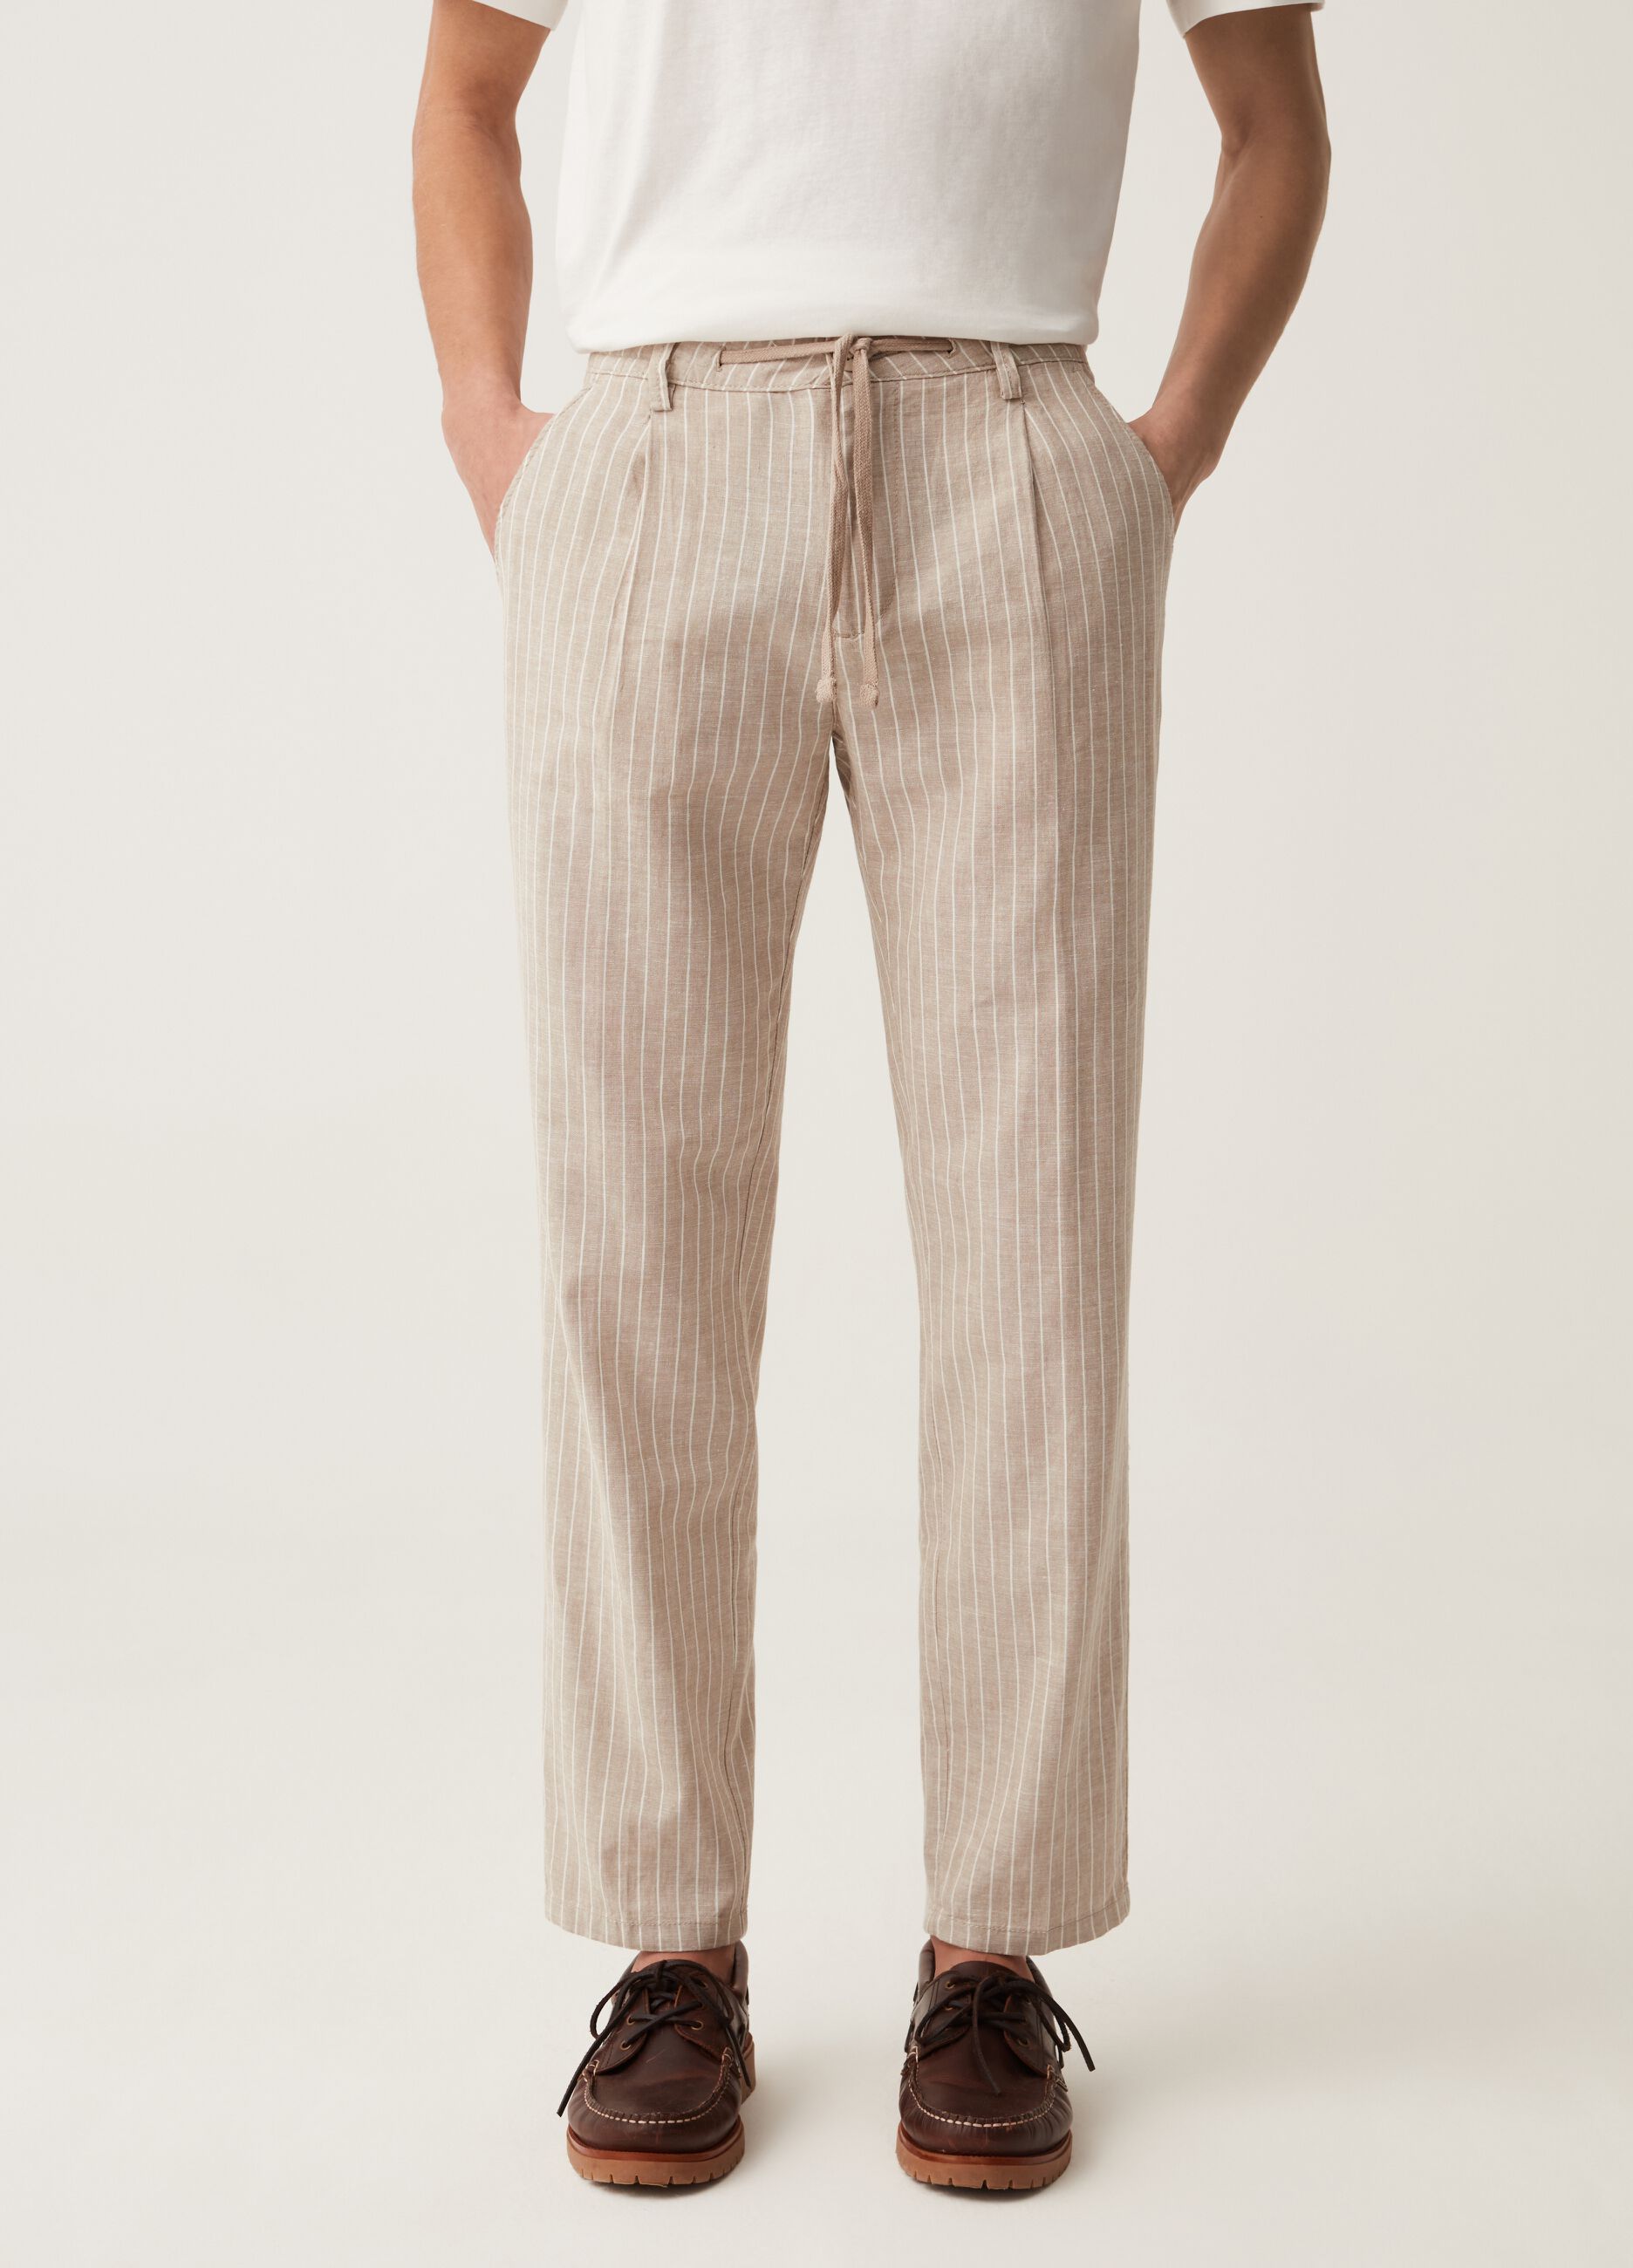 Striped chinos in cotton chambray